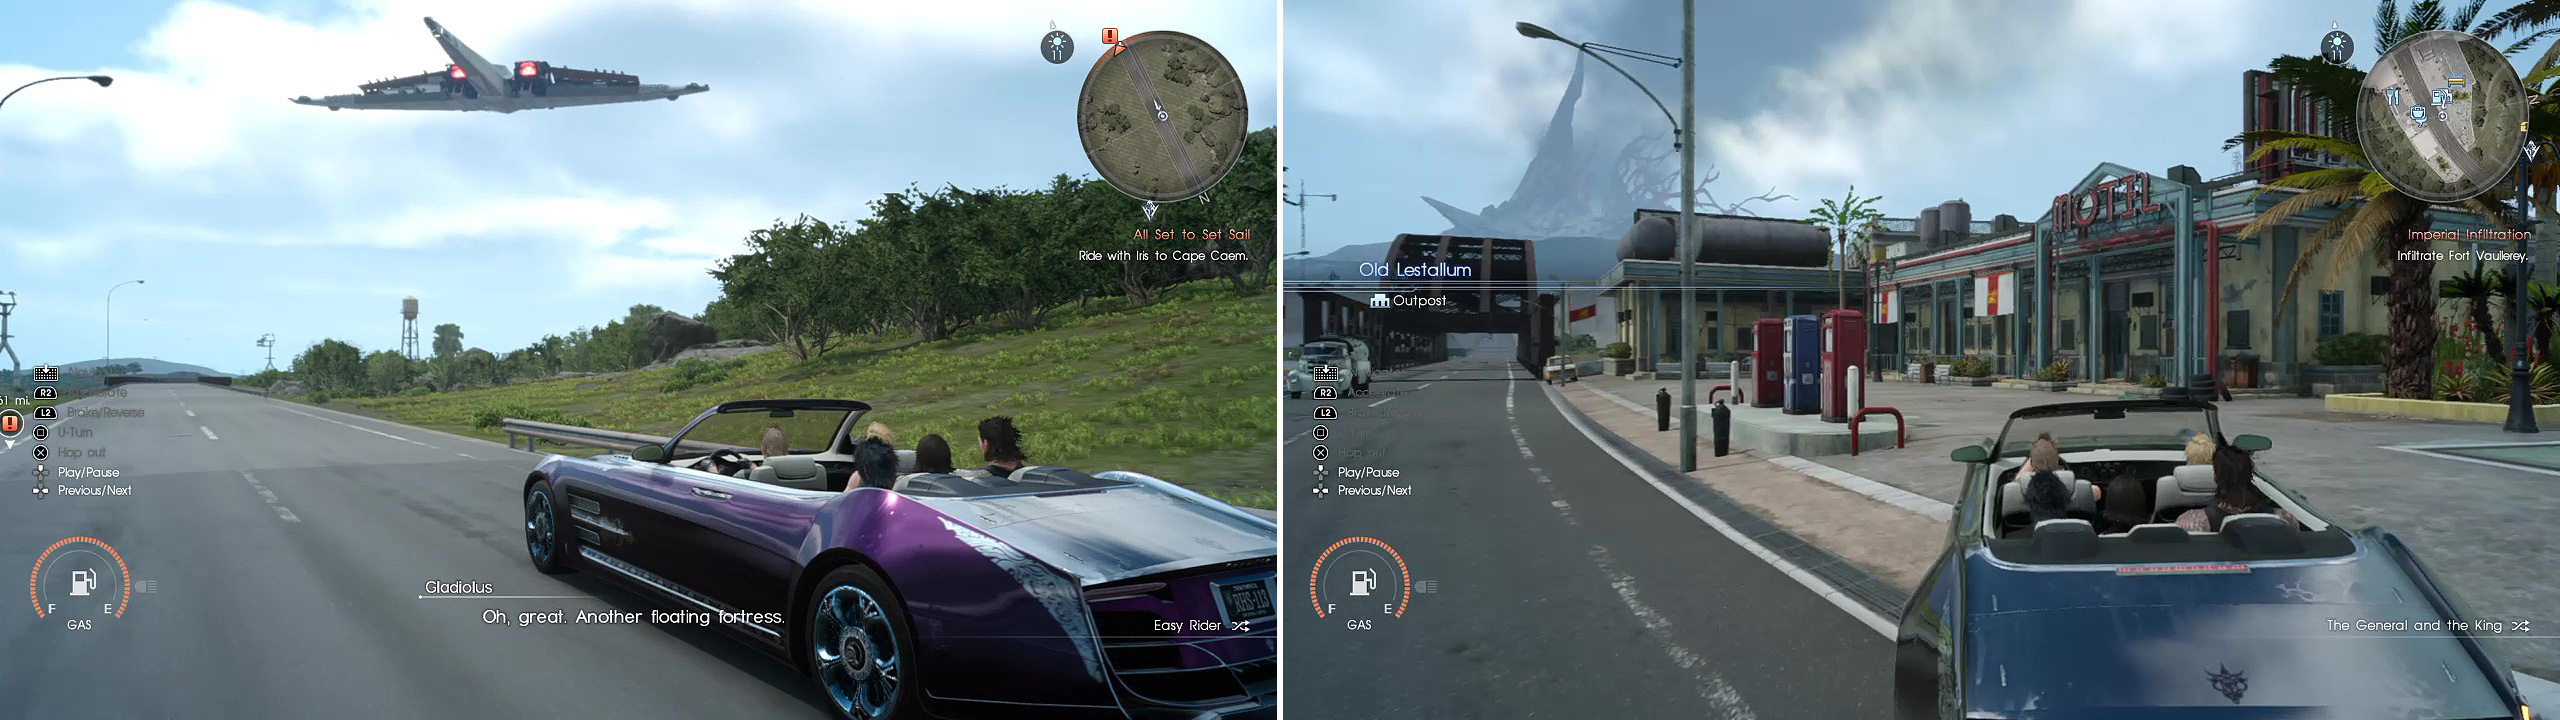 Enjoy the scenery and listen to some music as you drive (left) then pull over to begin the next quest (right).